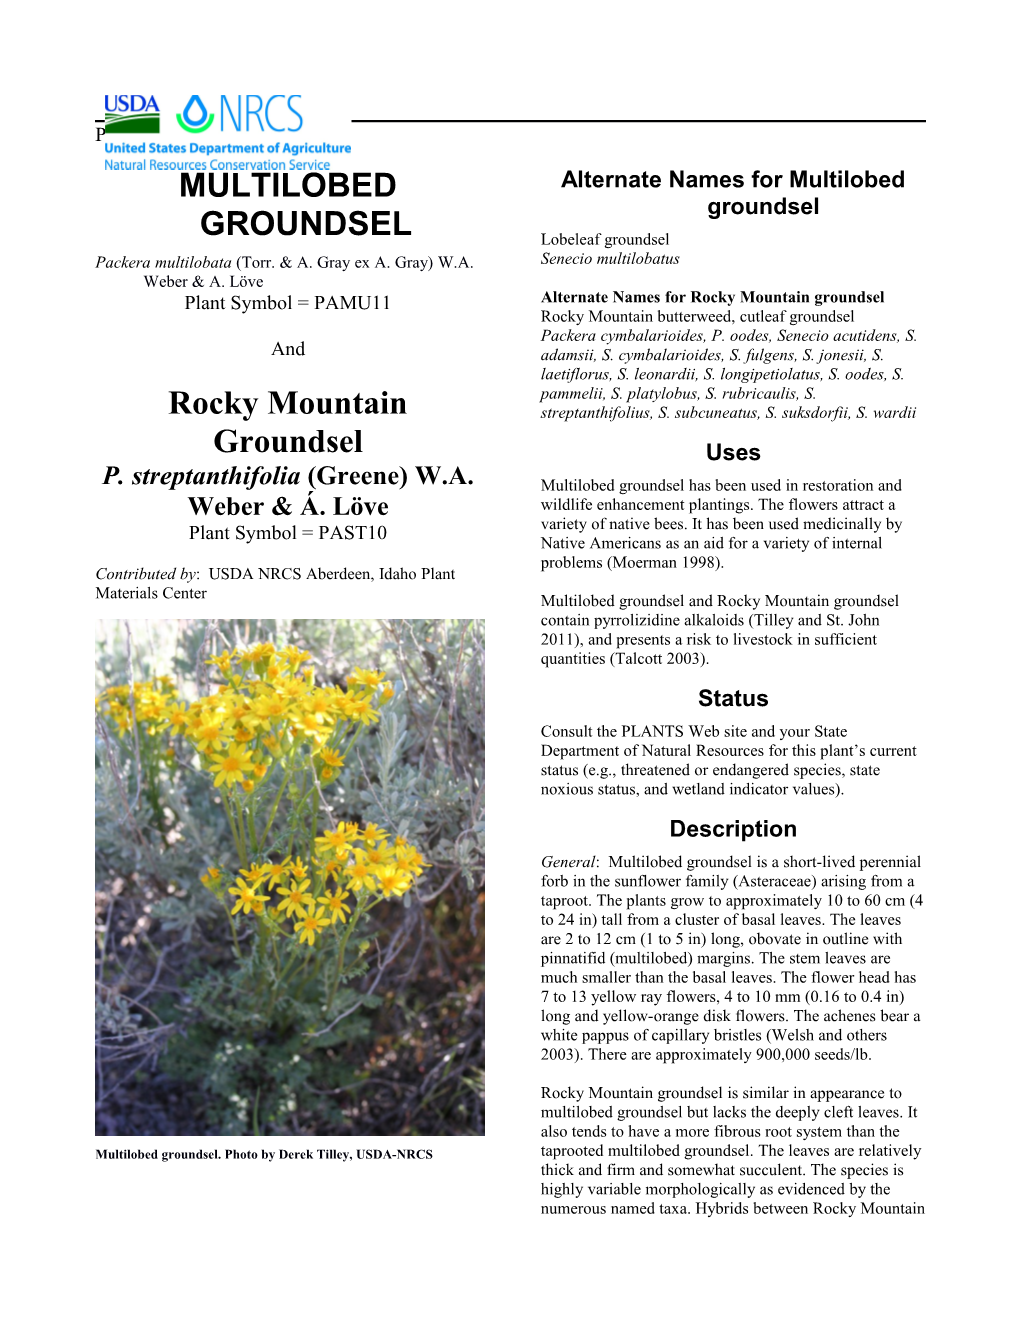 Plant Guide for Multilobed Groundsel (Packera Multilobata) and Rocky Mountain Groundsel